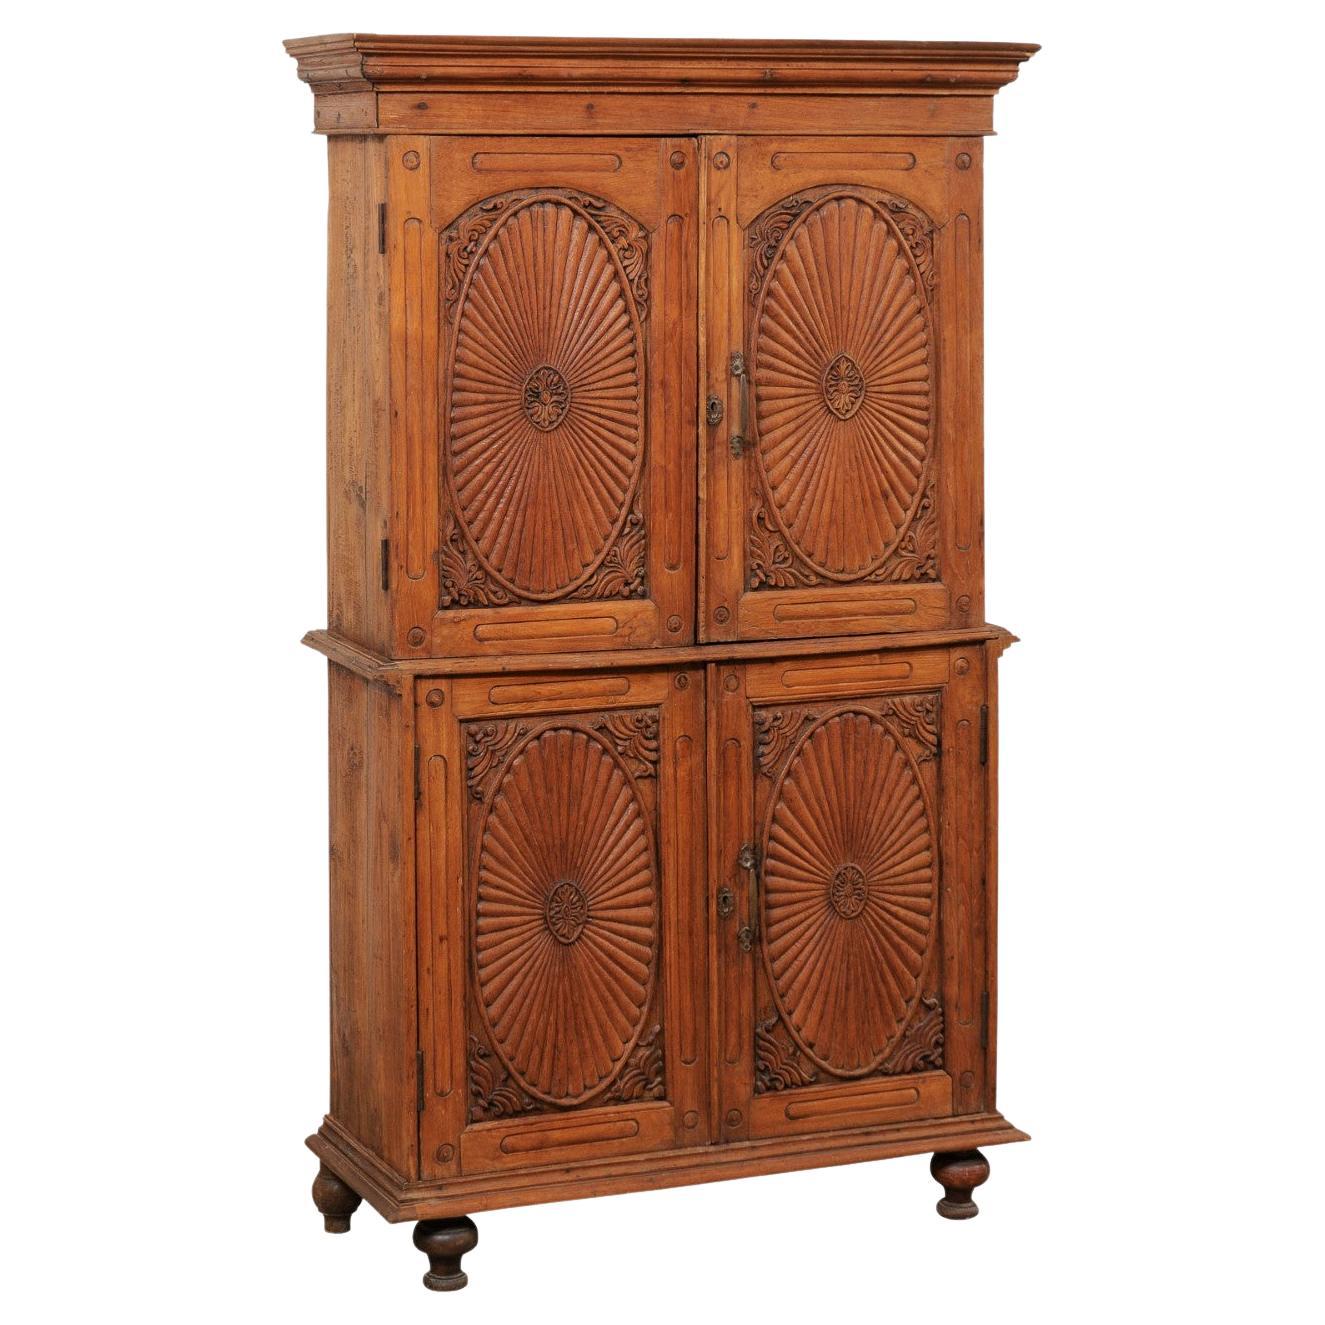 Tall British Colonial Teak-Carved Cabinet W/ Beautifully Carved Doors, 19th C